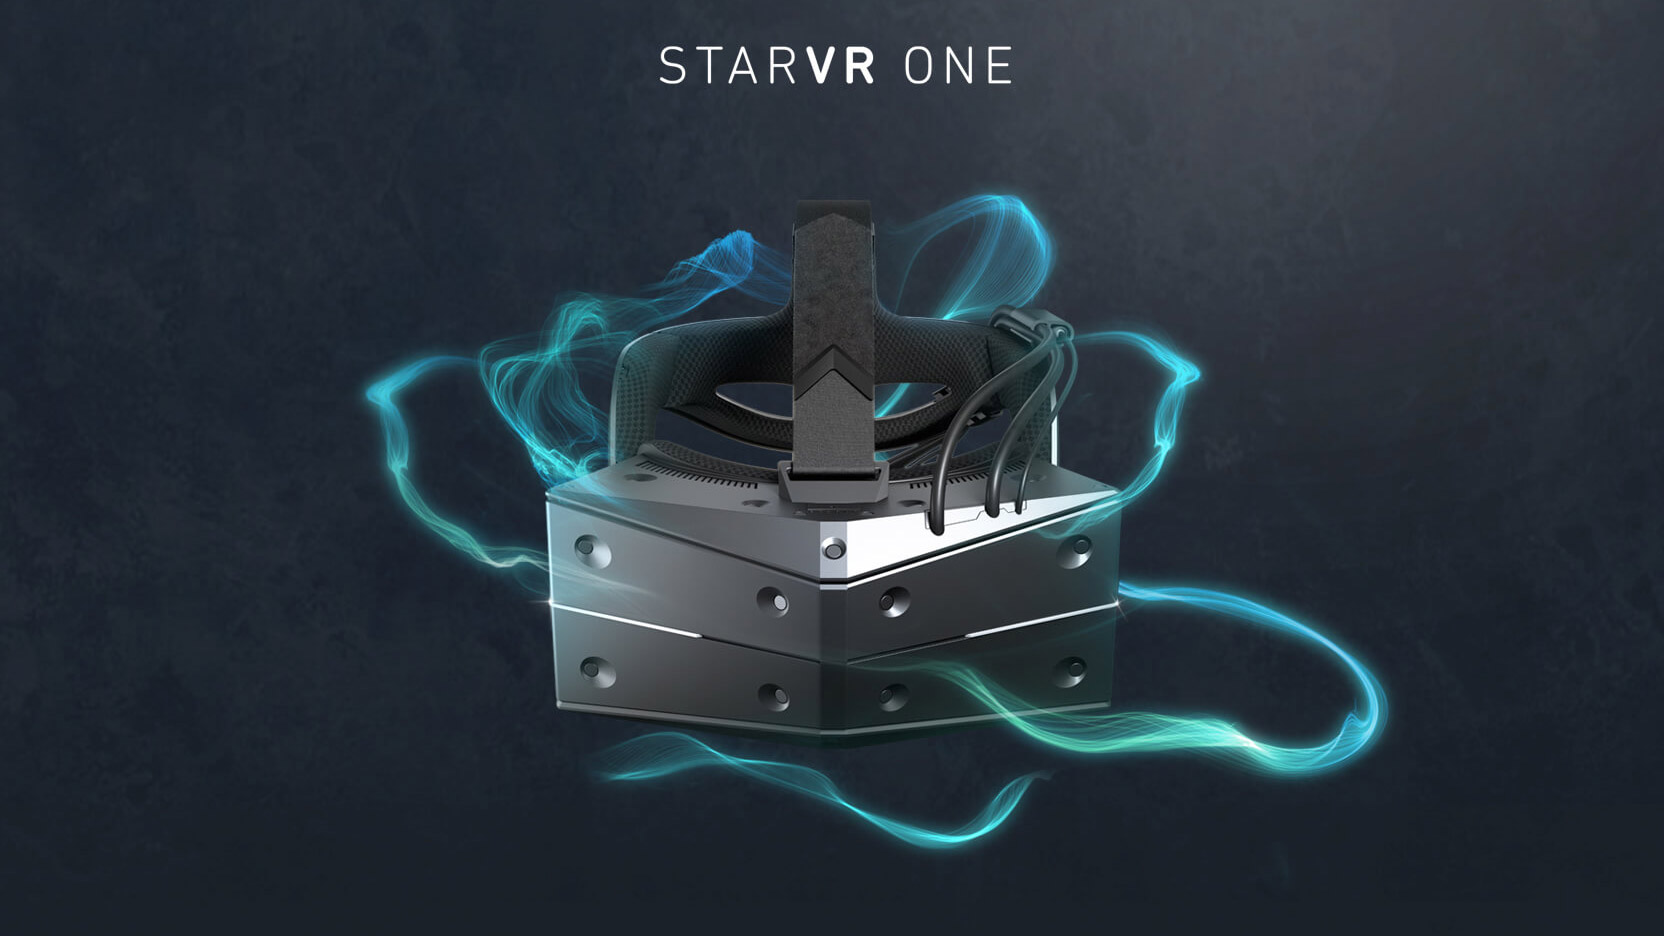 Ultra-wide FOV Headset StarVR One Priced at $3,200, Selling to